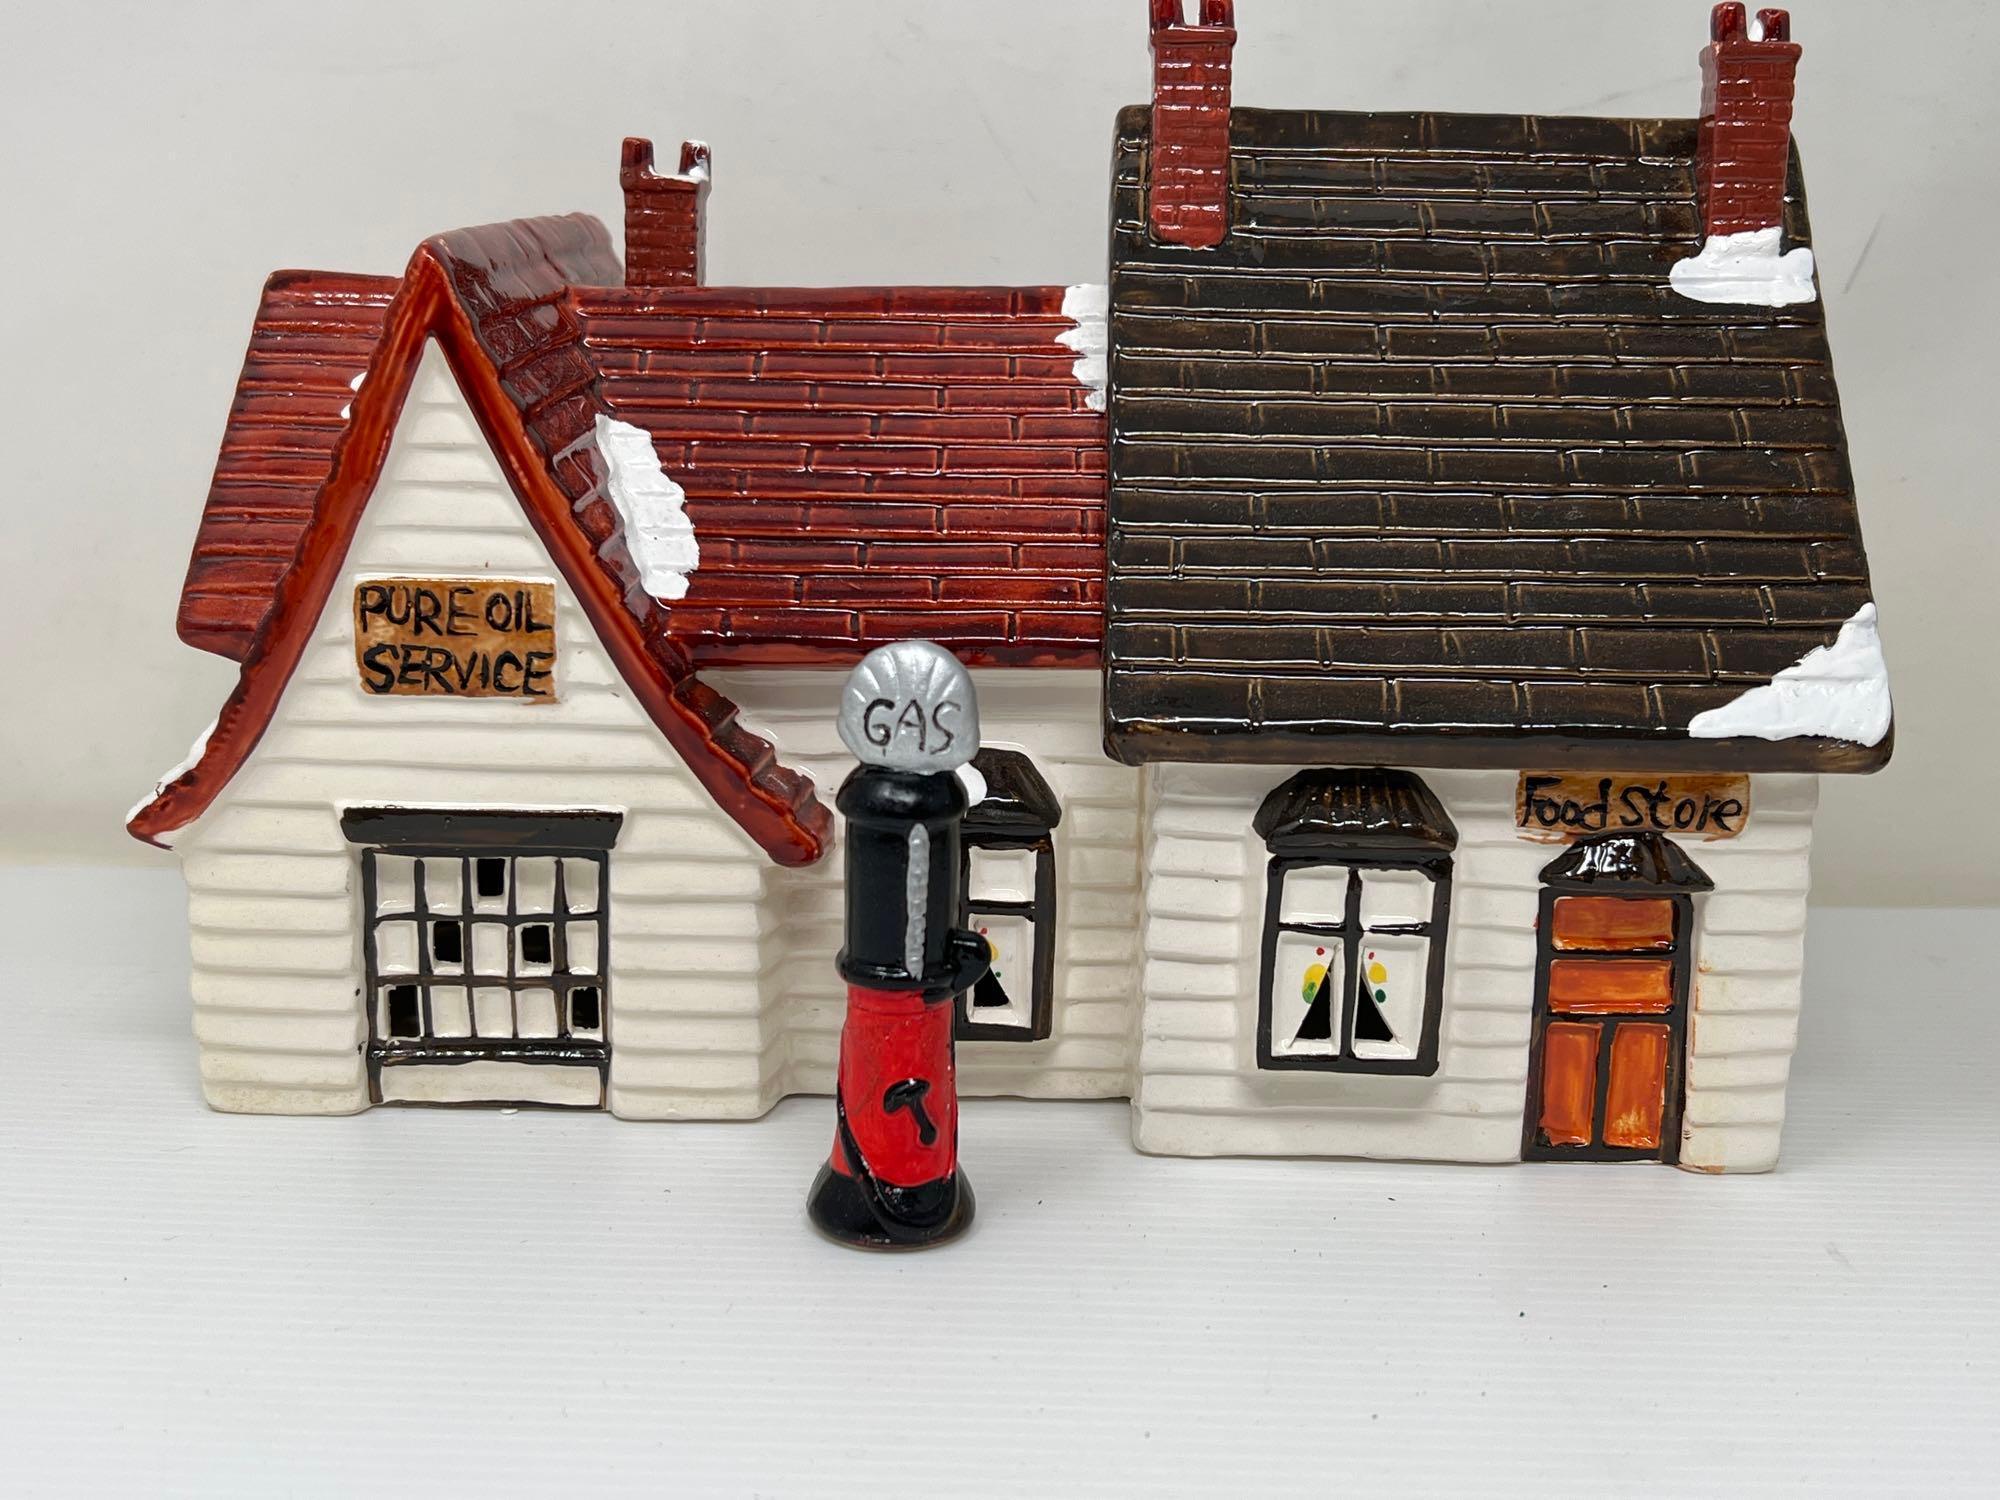 Ceramic Christmas Houses, Buildings, Fire Department, Store Window, Trees